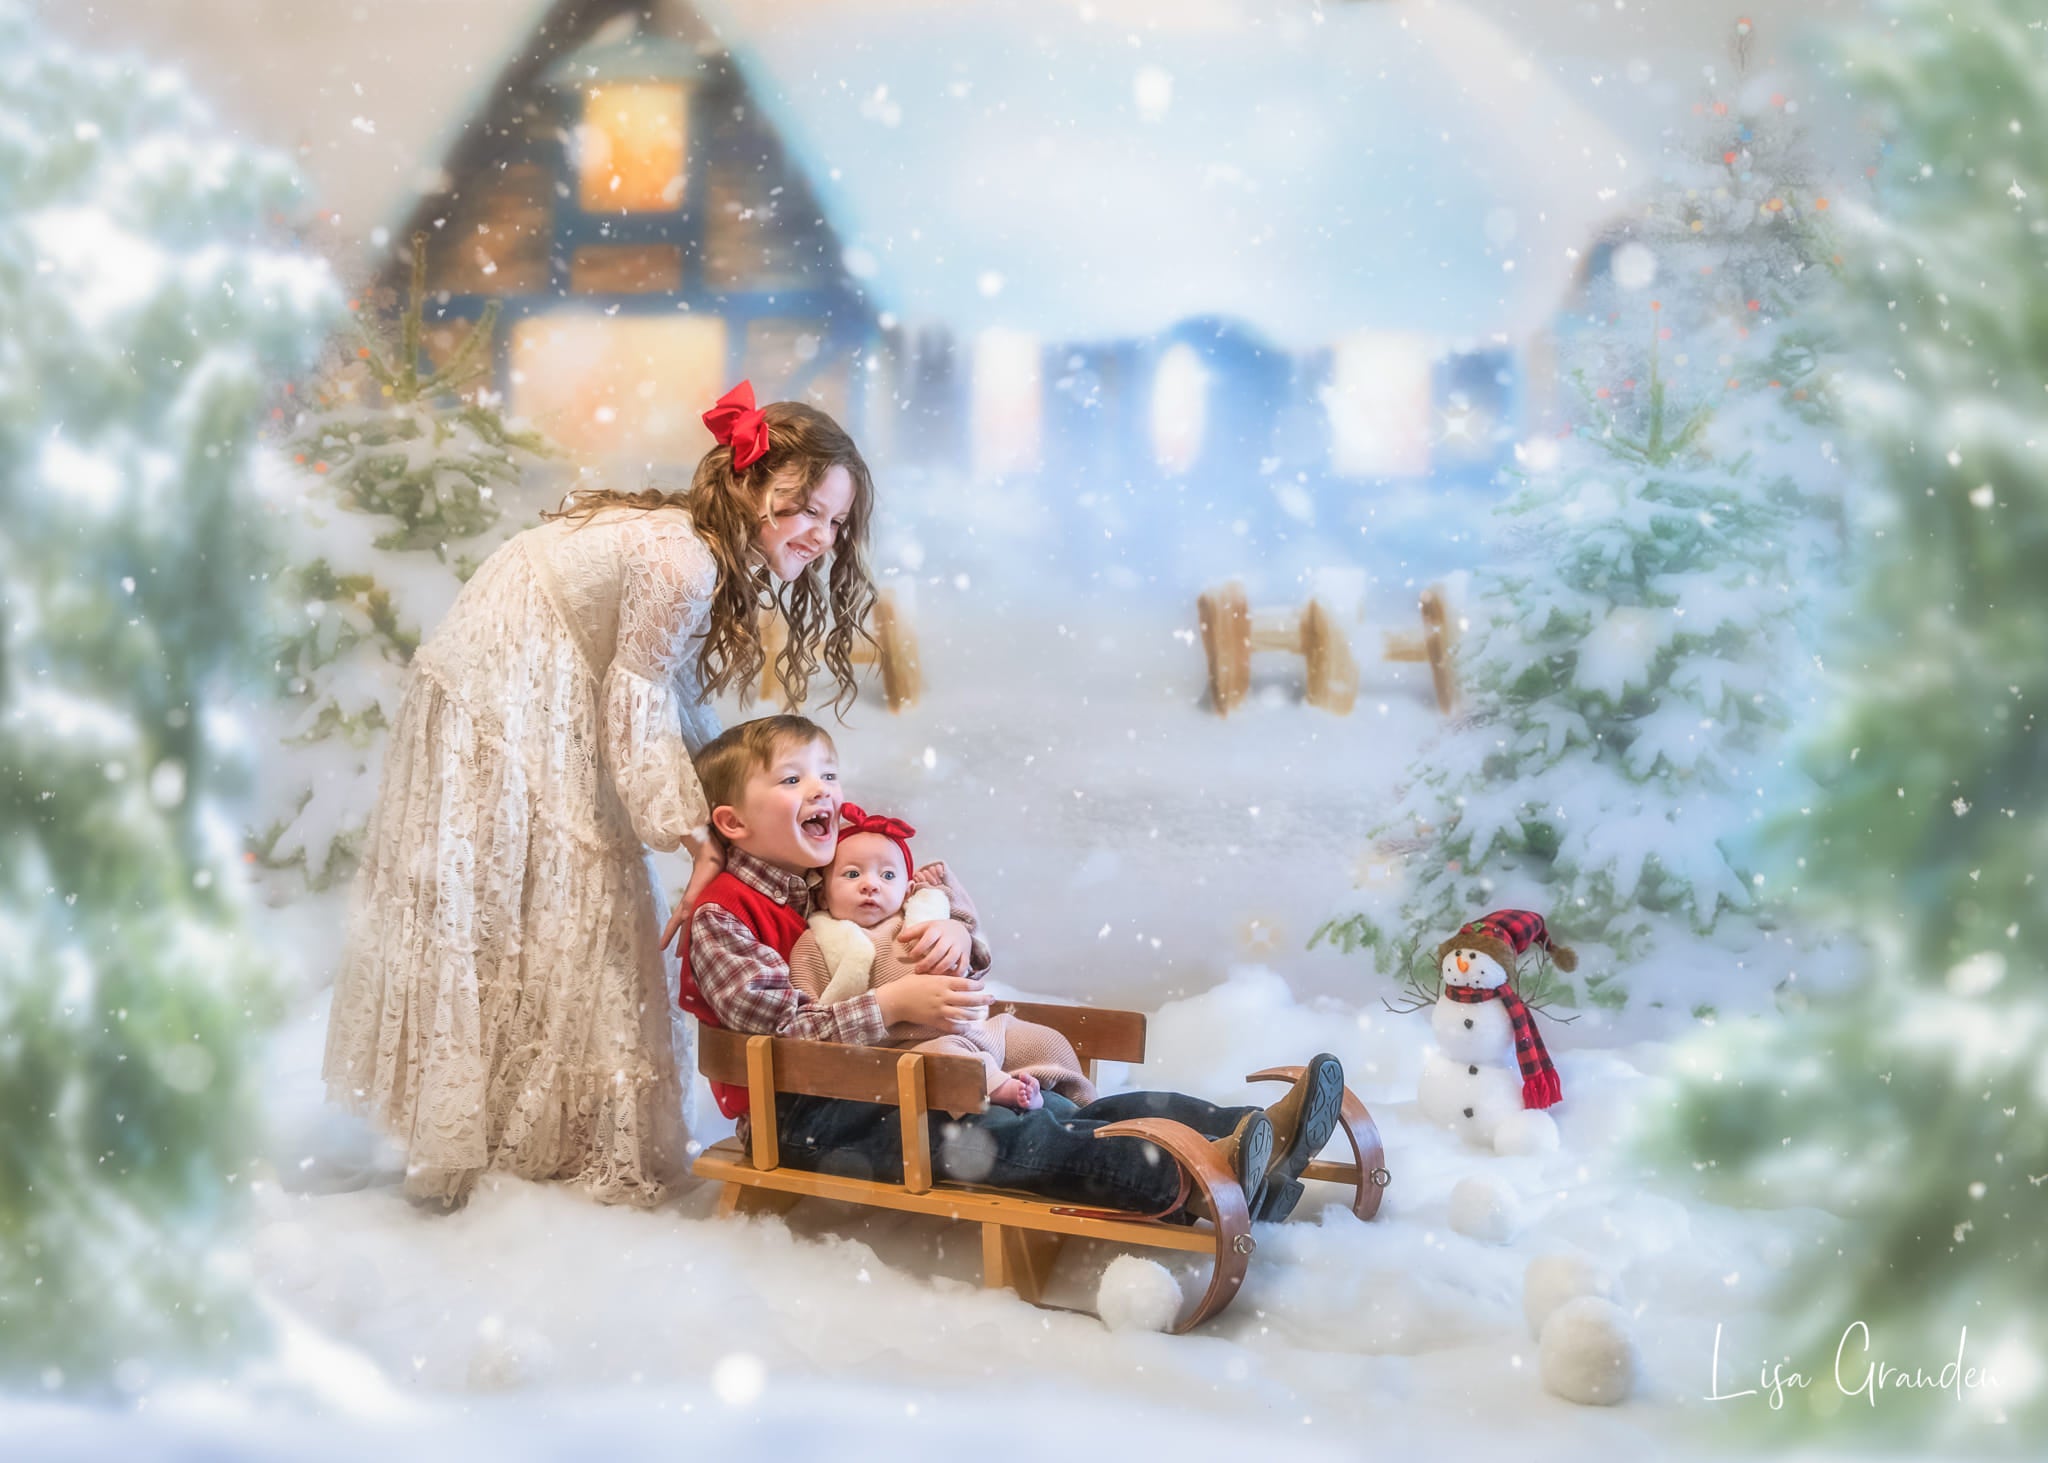 Kate Winter Christmas Snow House Tree Backdrop for Photography